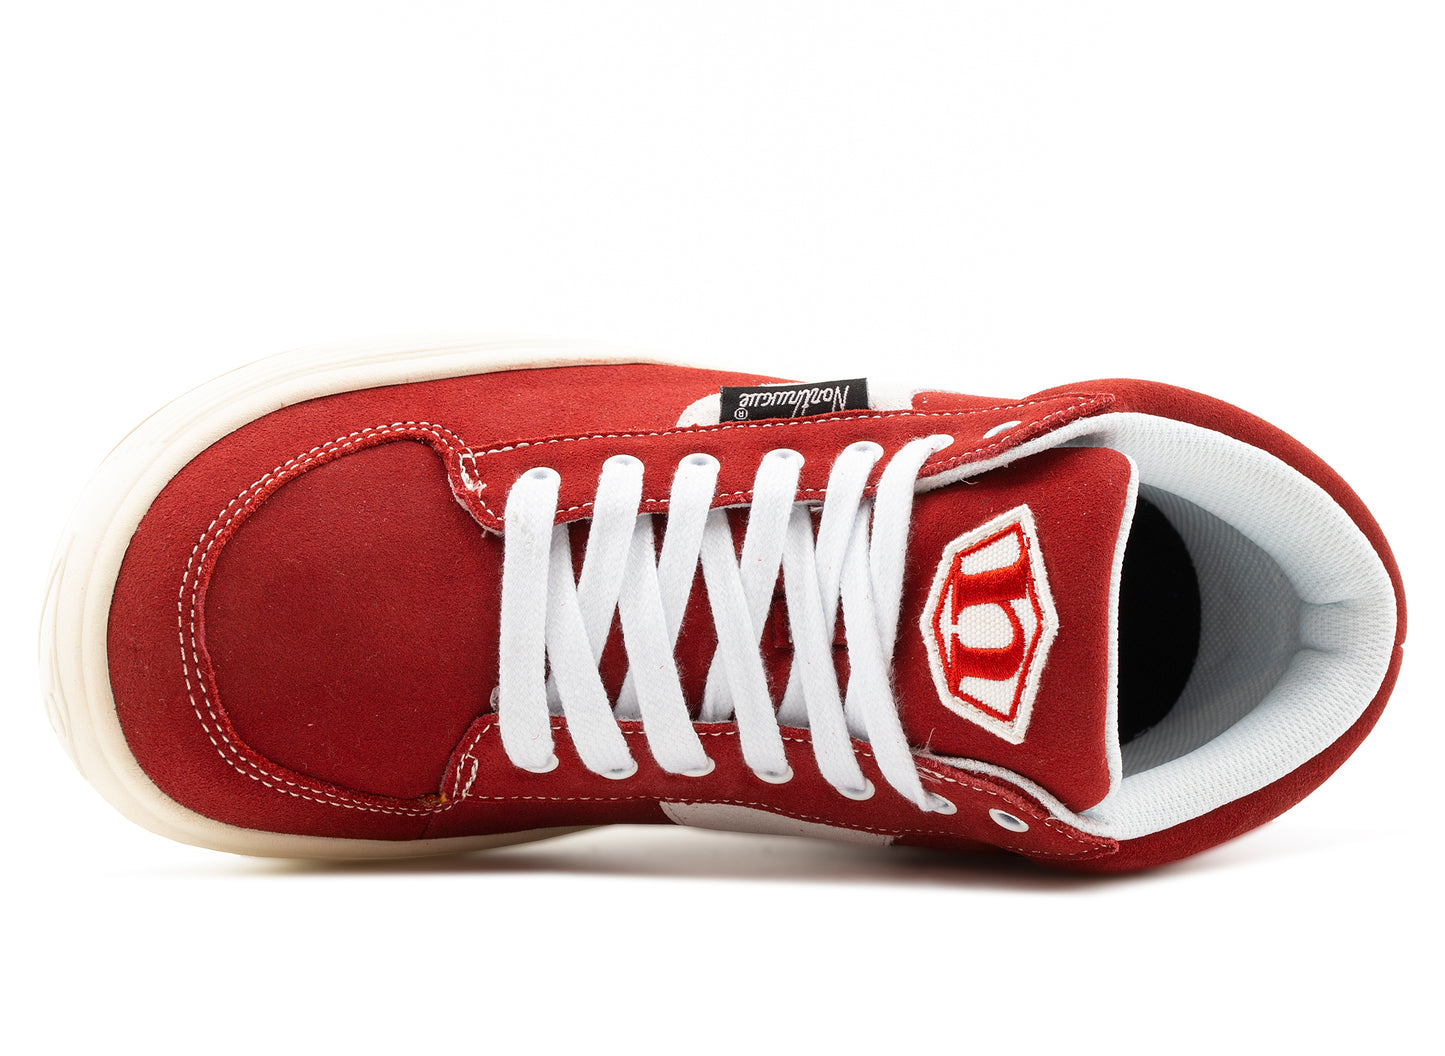 Northwave Expresso Chili Suede Sneakers in Red